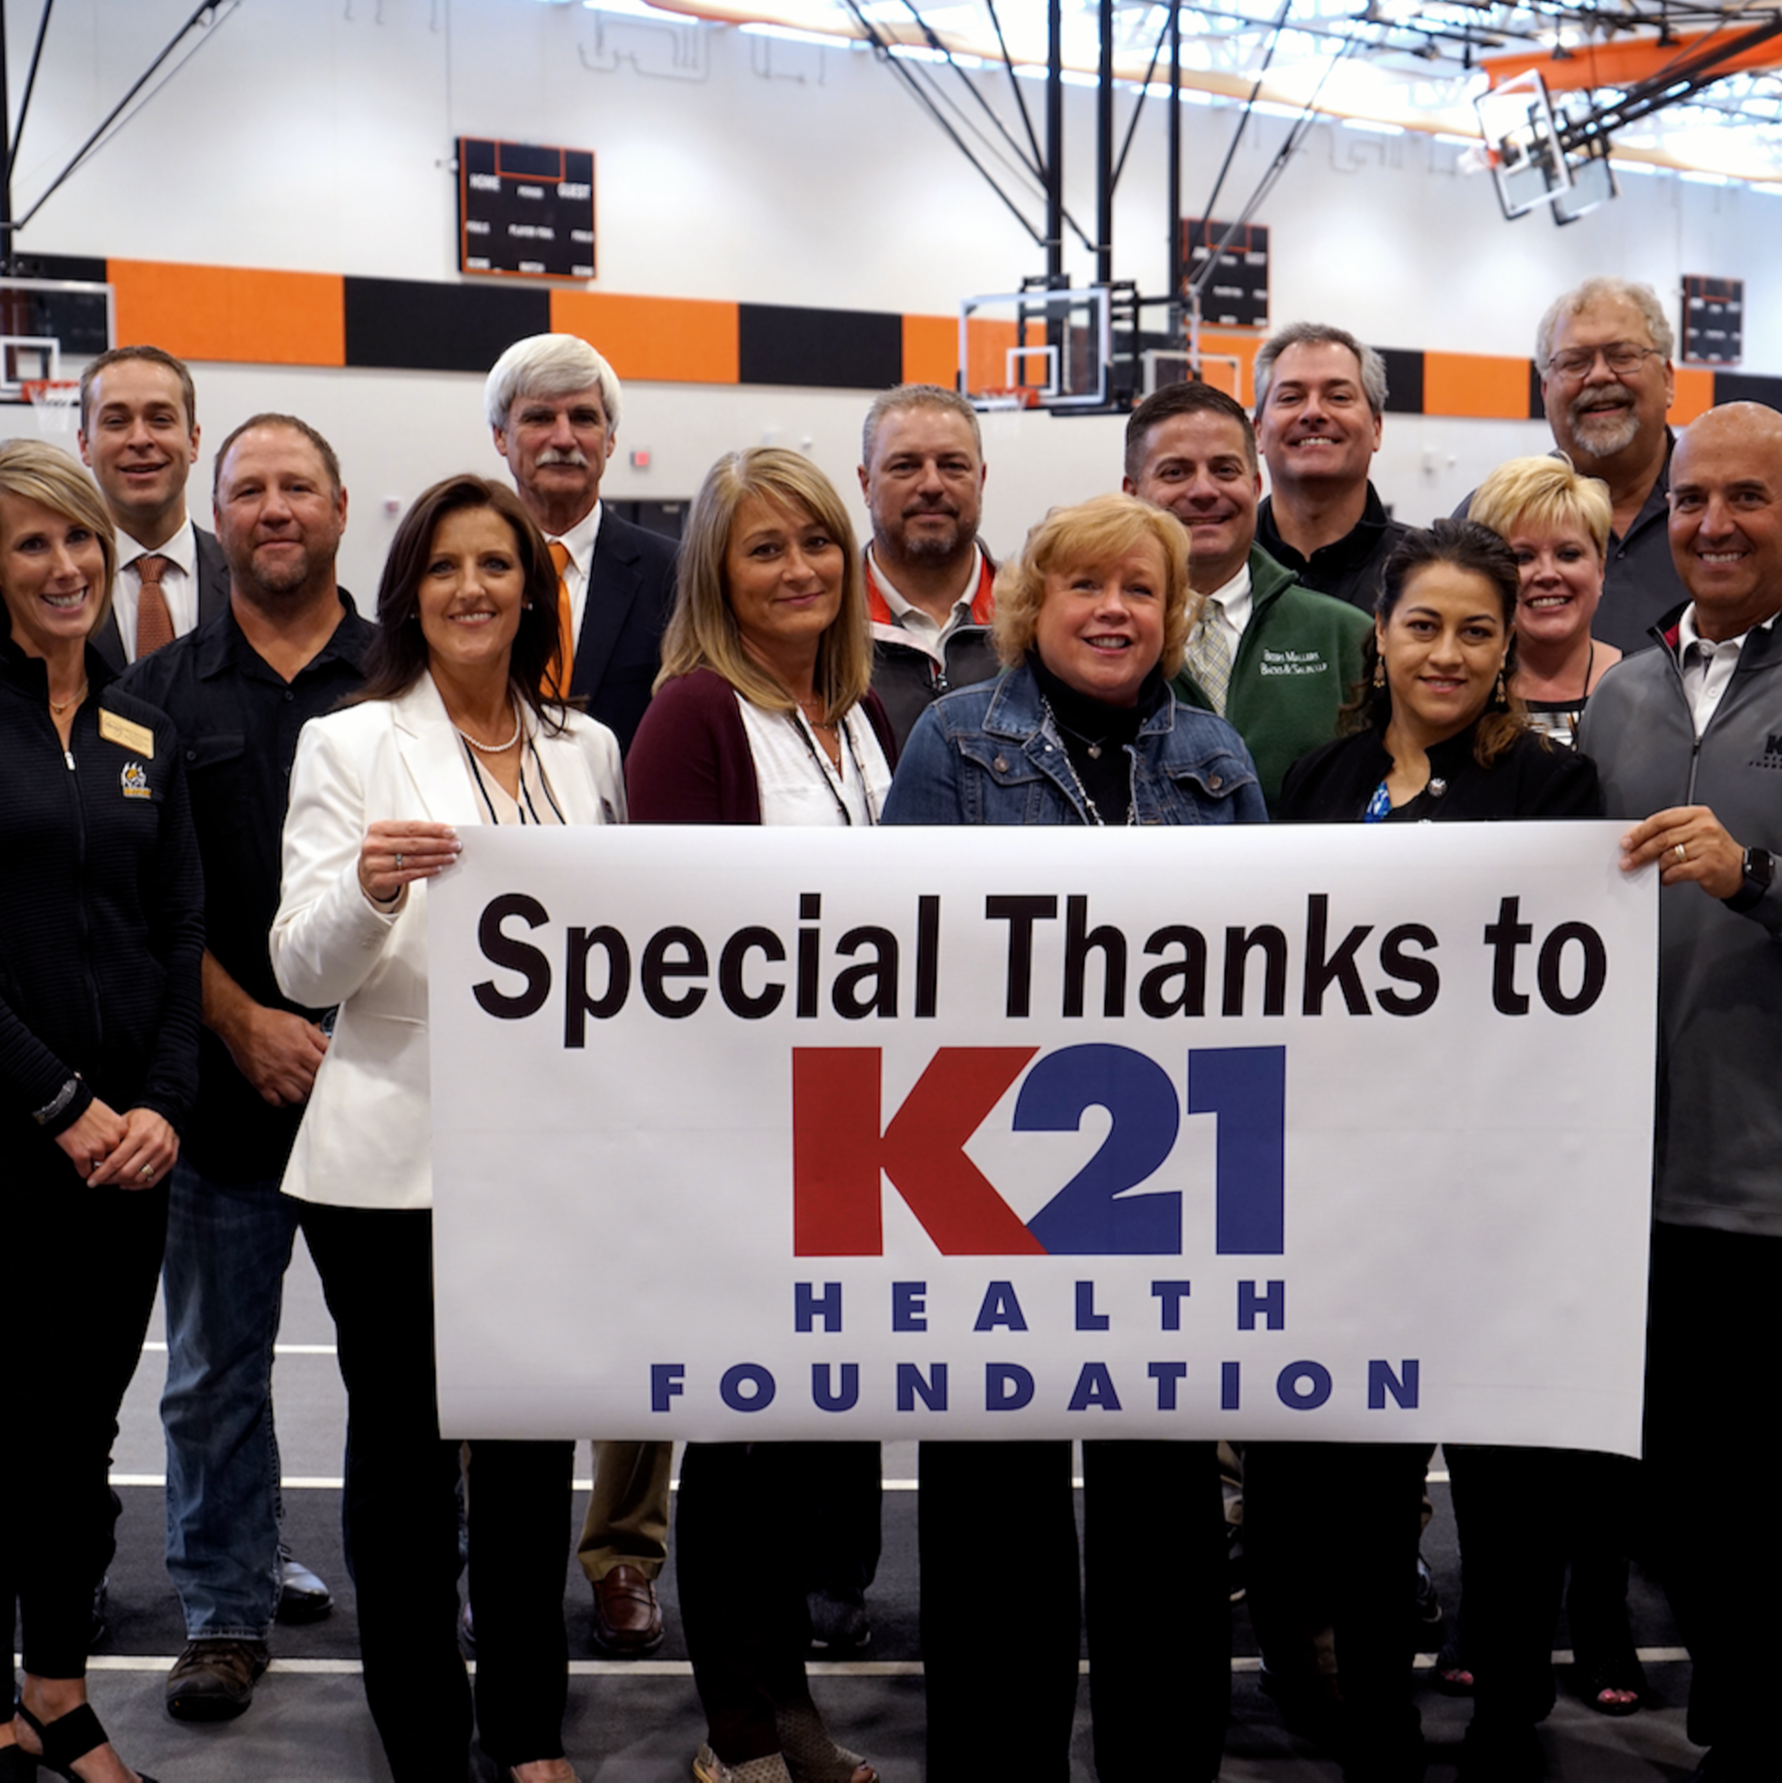 special thanks to k21 heatlh foundation banner being held up by team